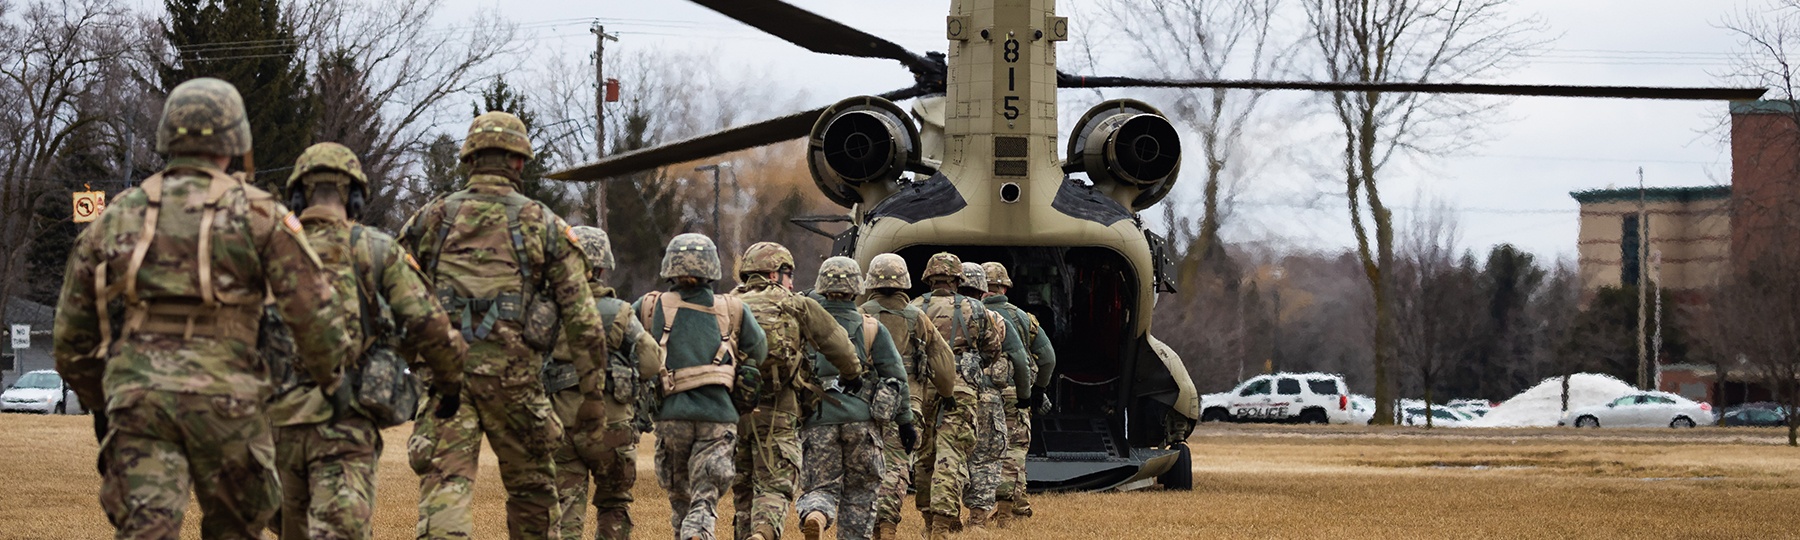 ROTC entering a helicopter